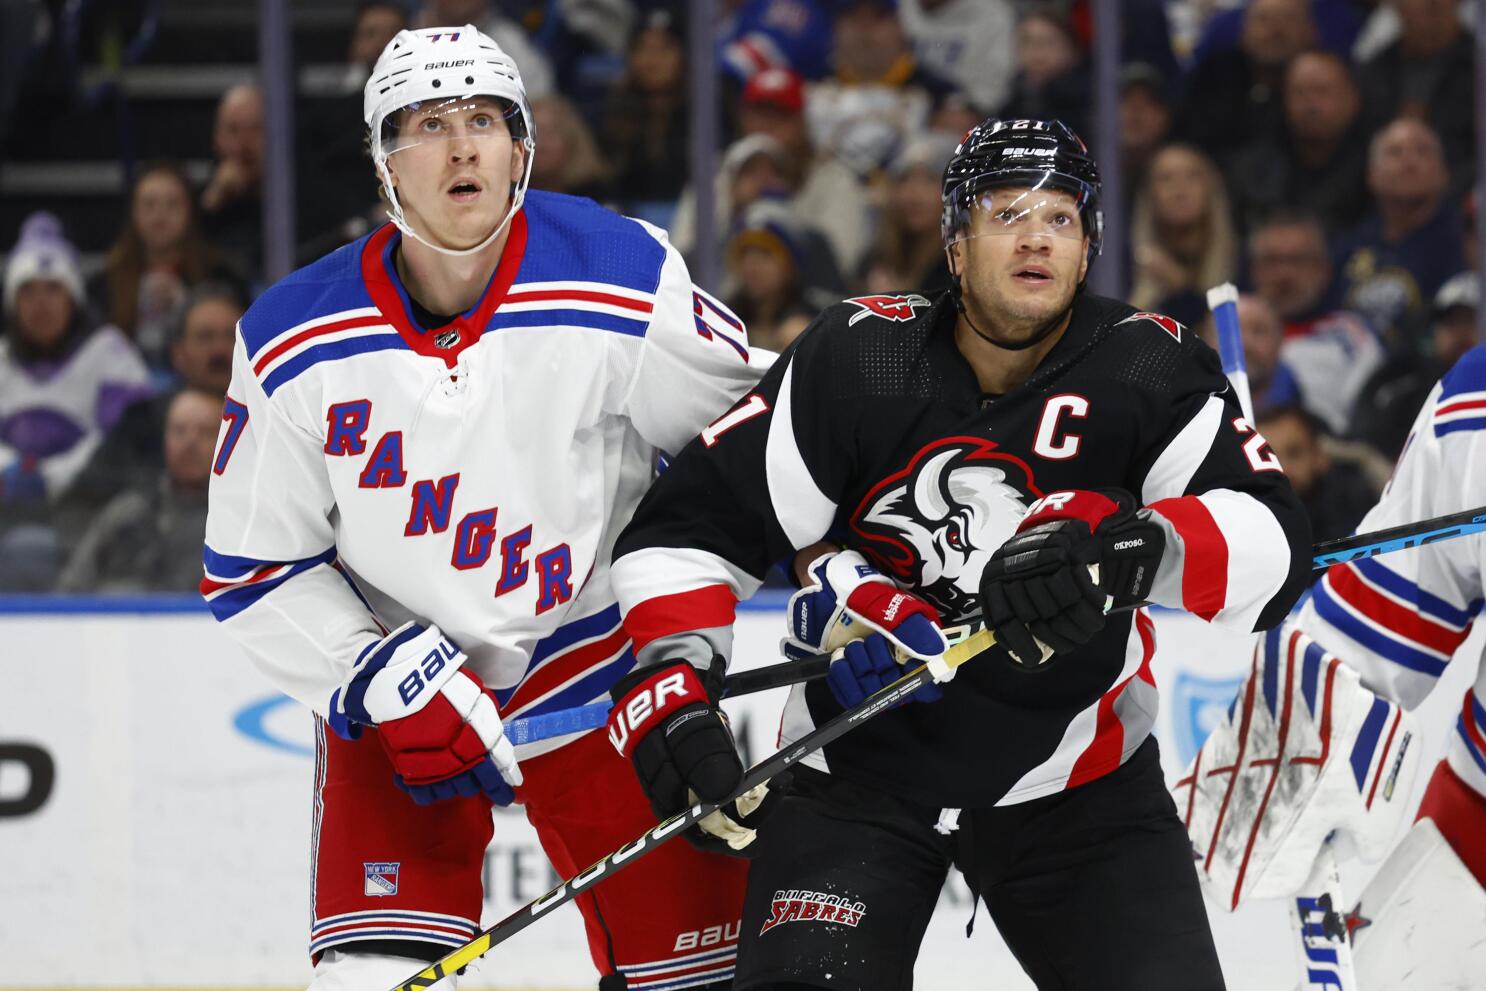 Sad ending to a once-promising hockey postseason for Rangers and